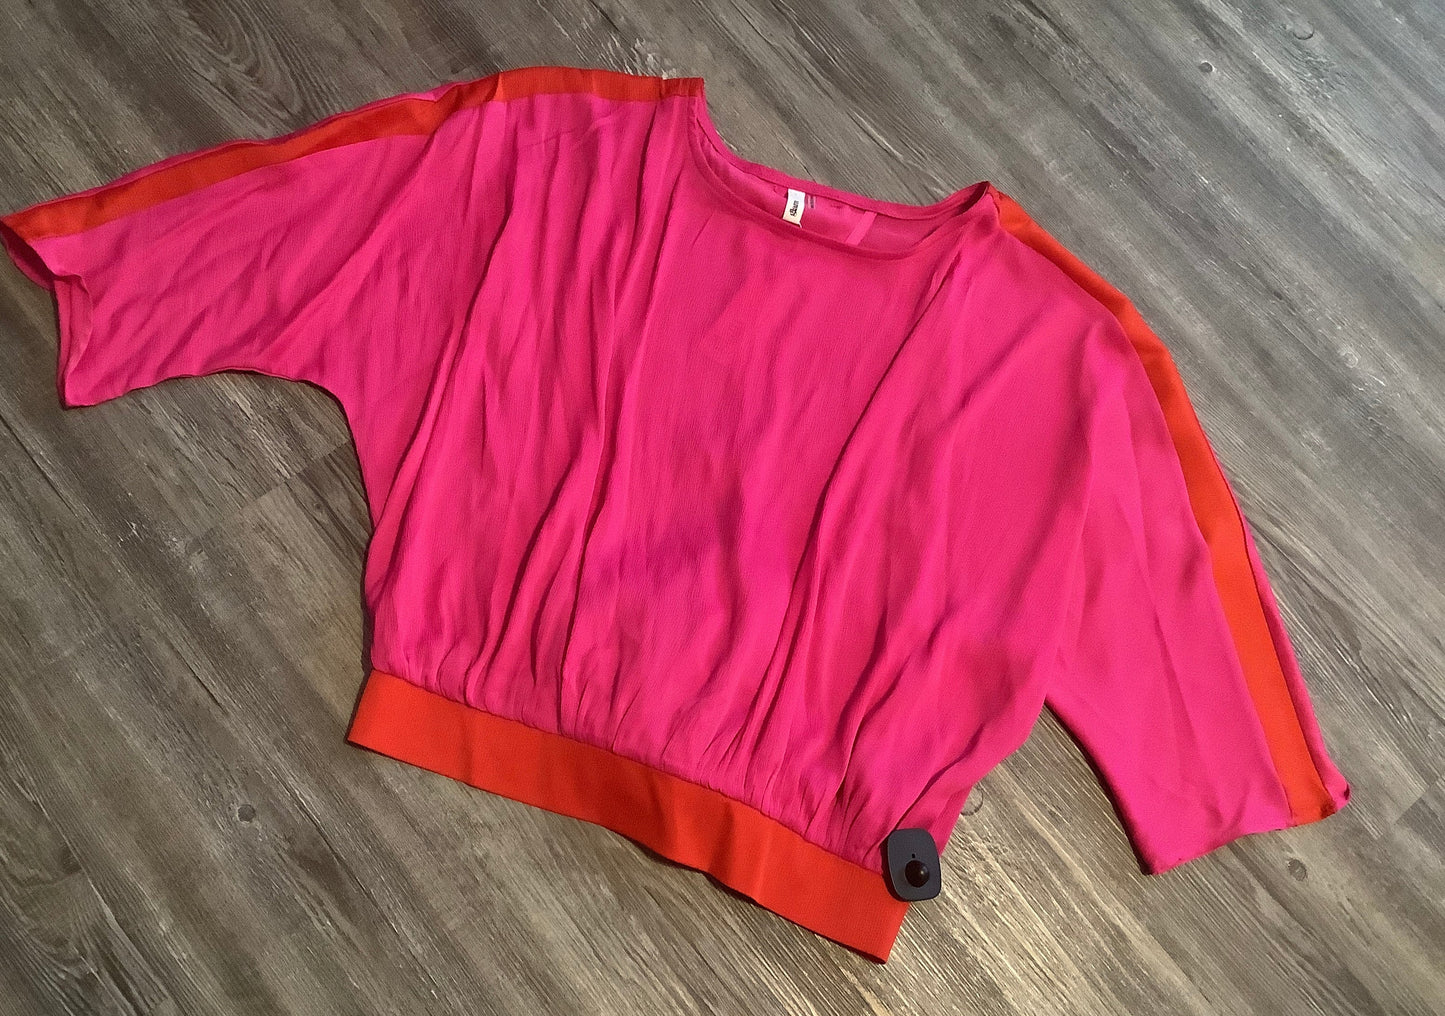 Pink Top Short Sleeve Glam, Size L